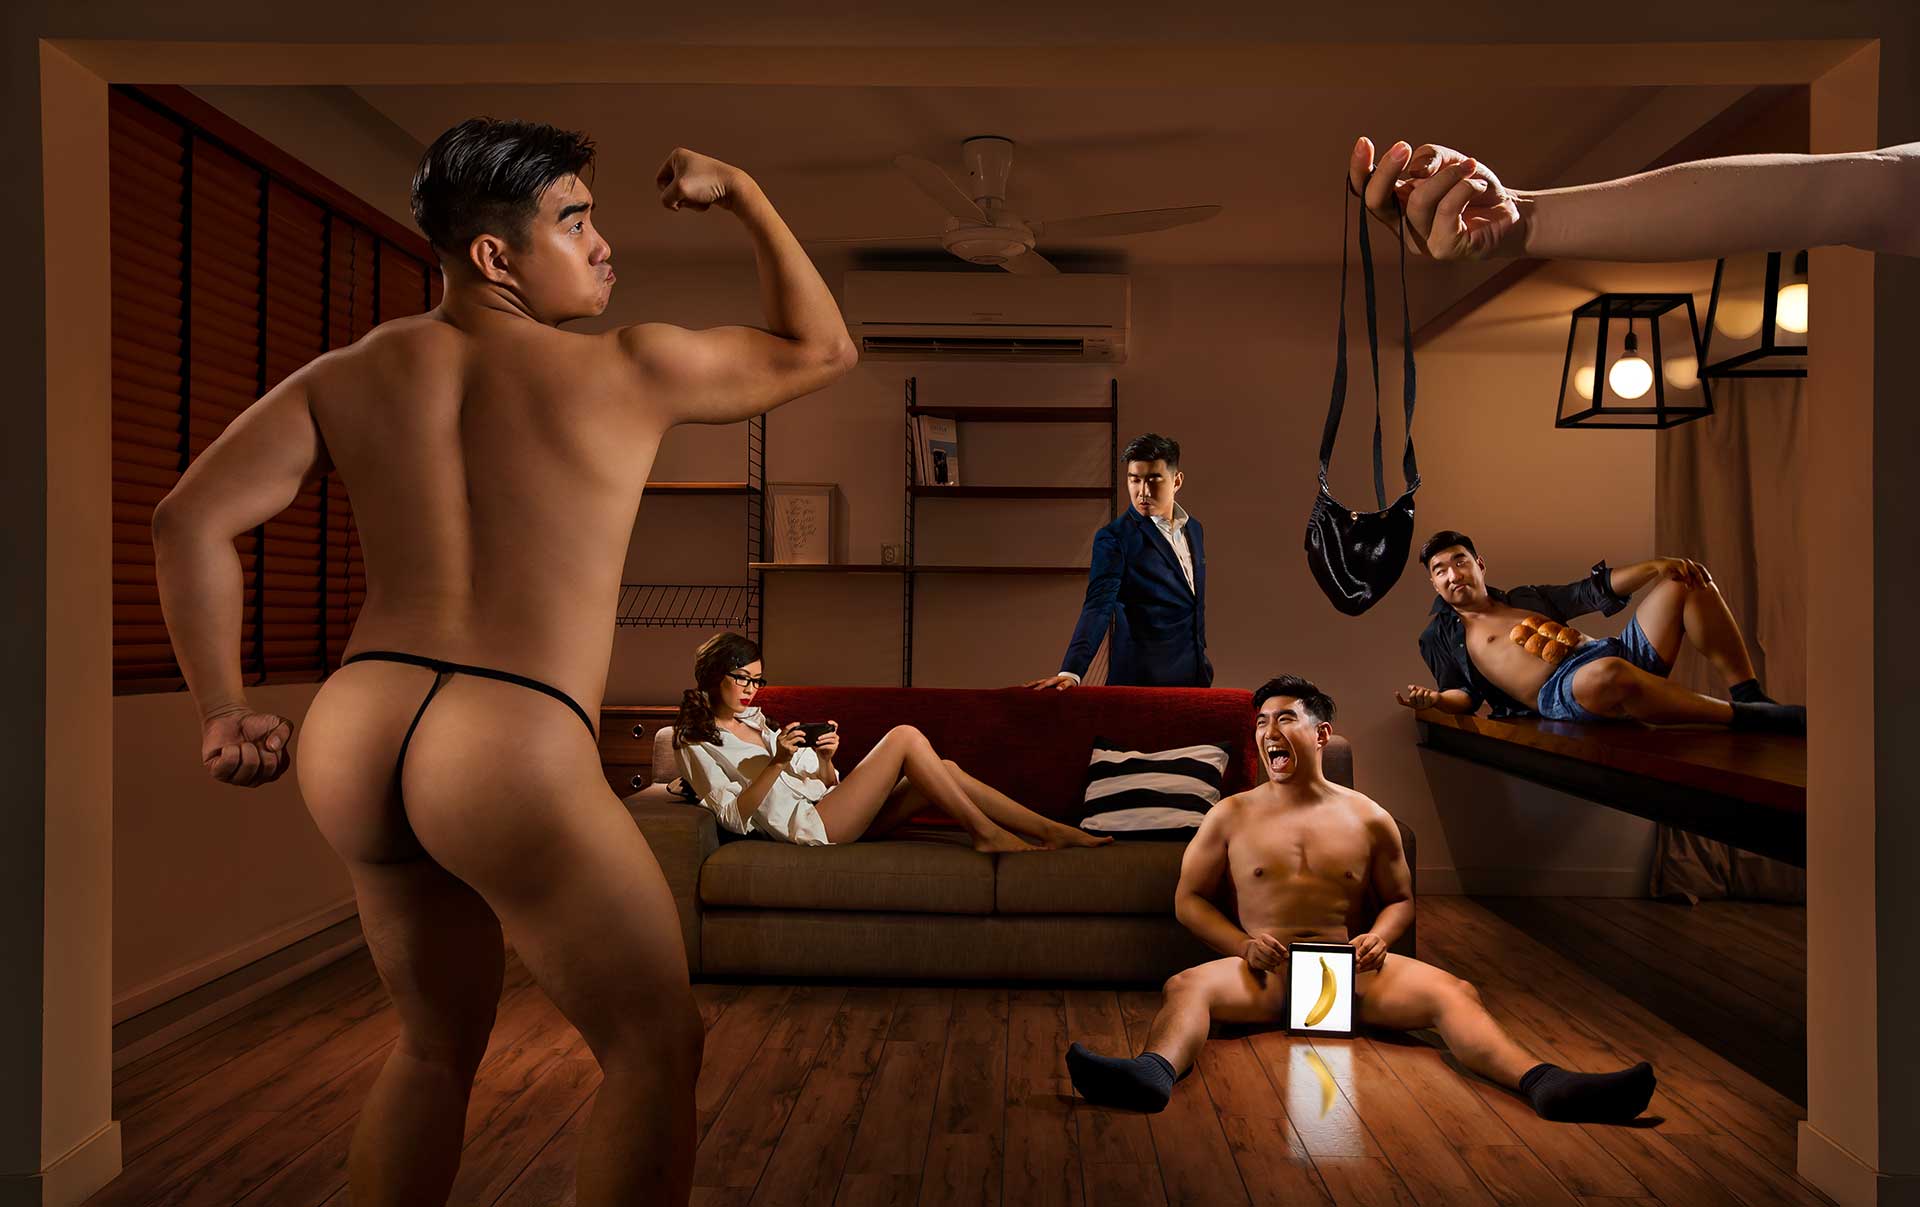 A man in underwear confidently poses in front of a group of people in a funny and creative photoshoot.